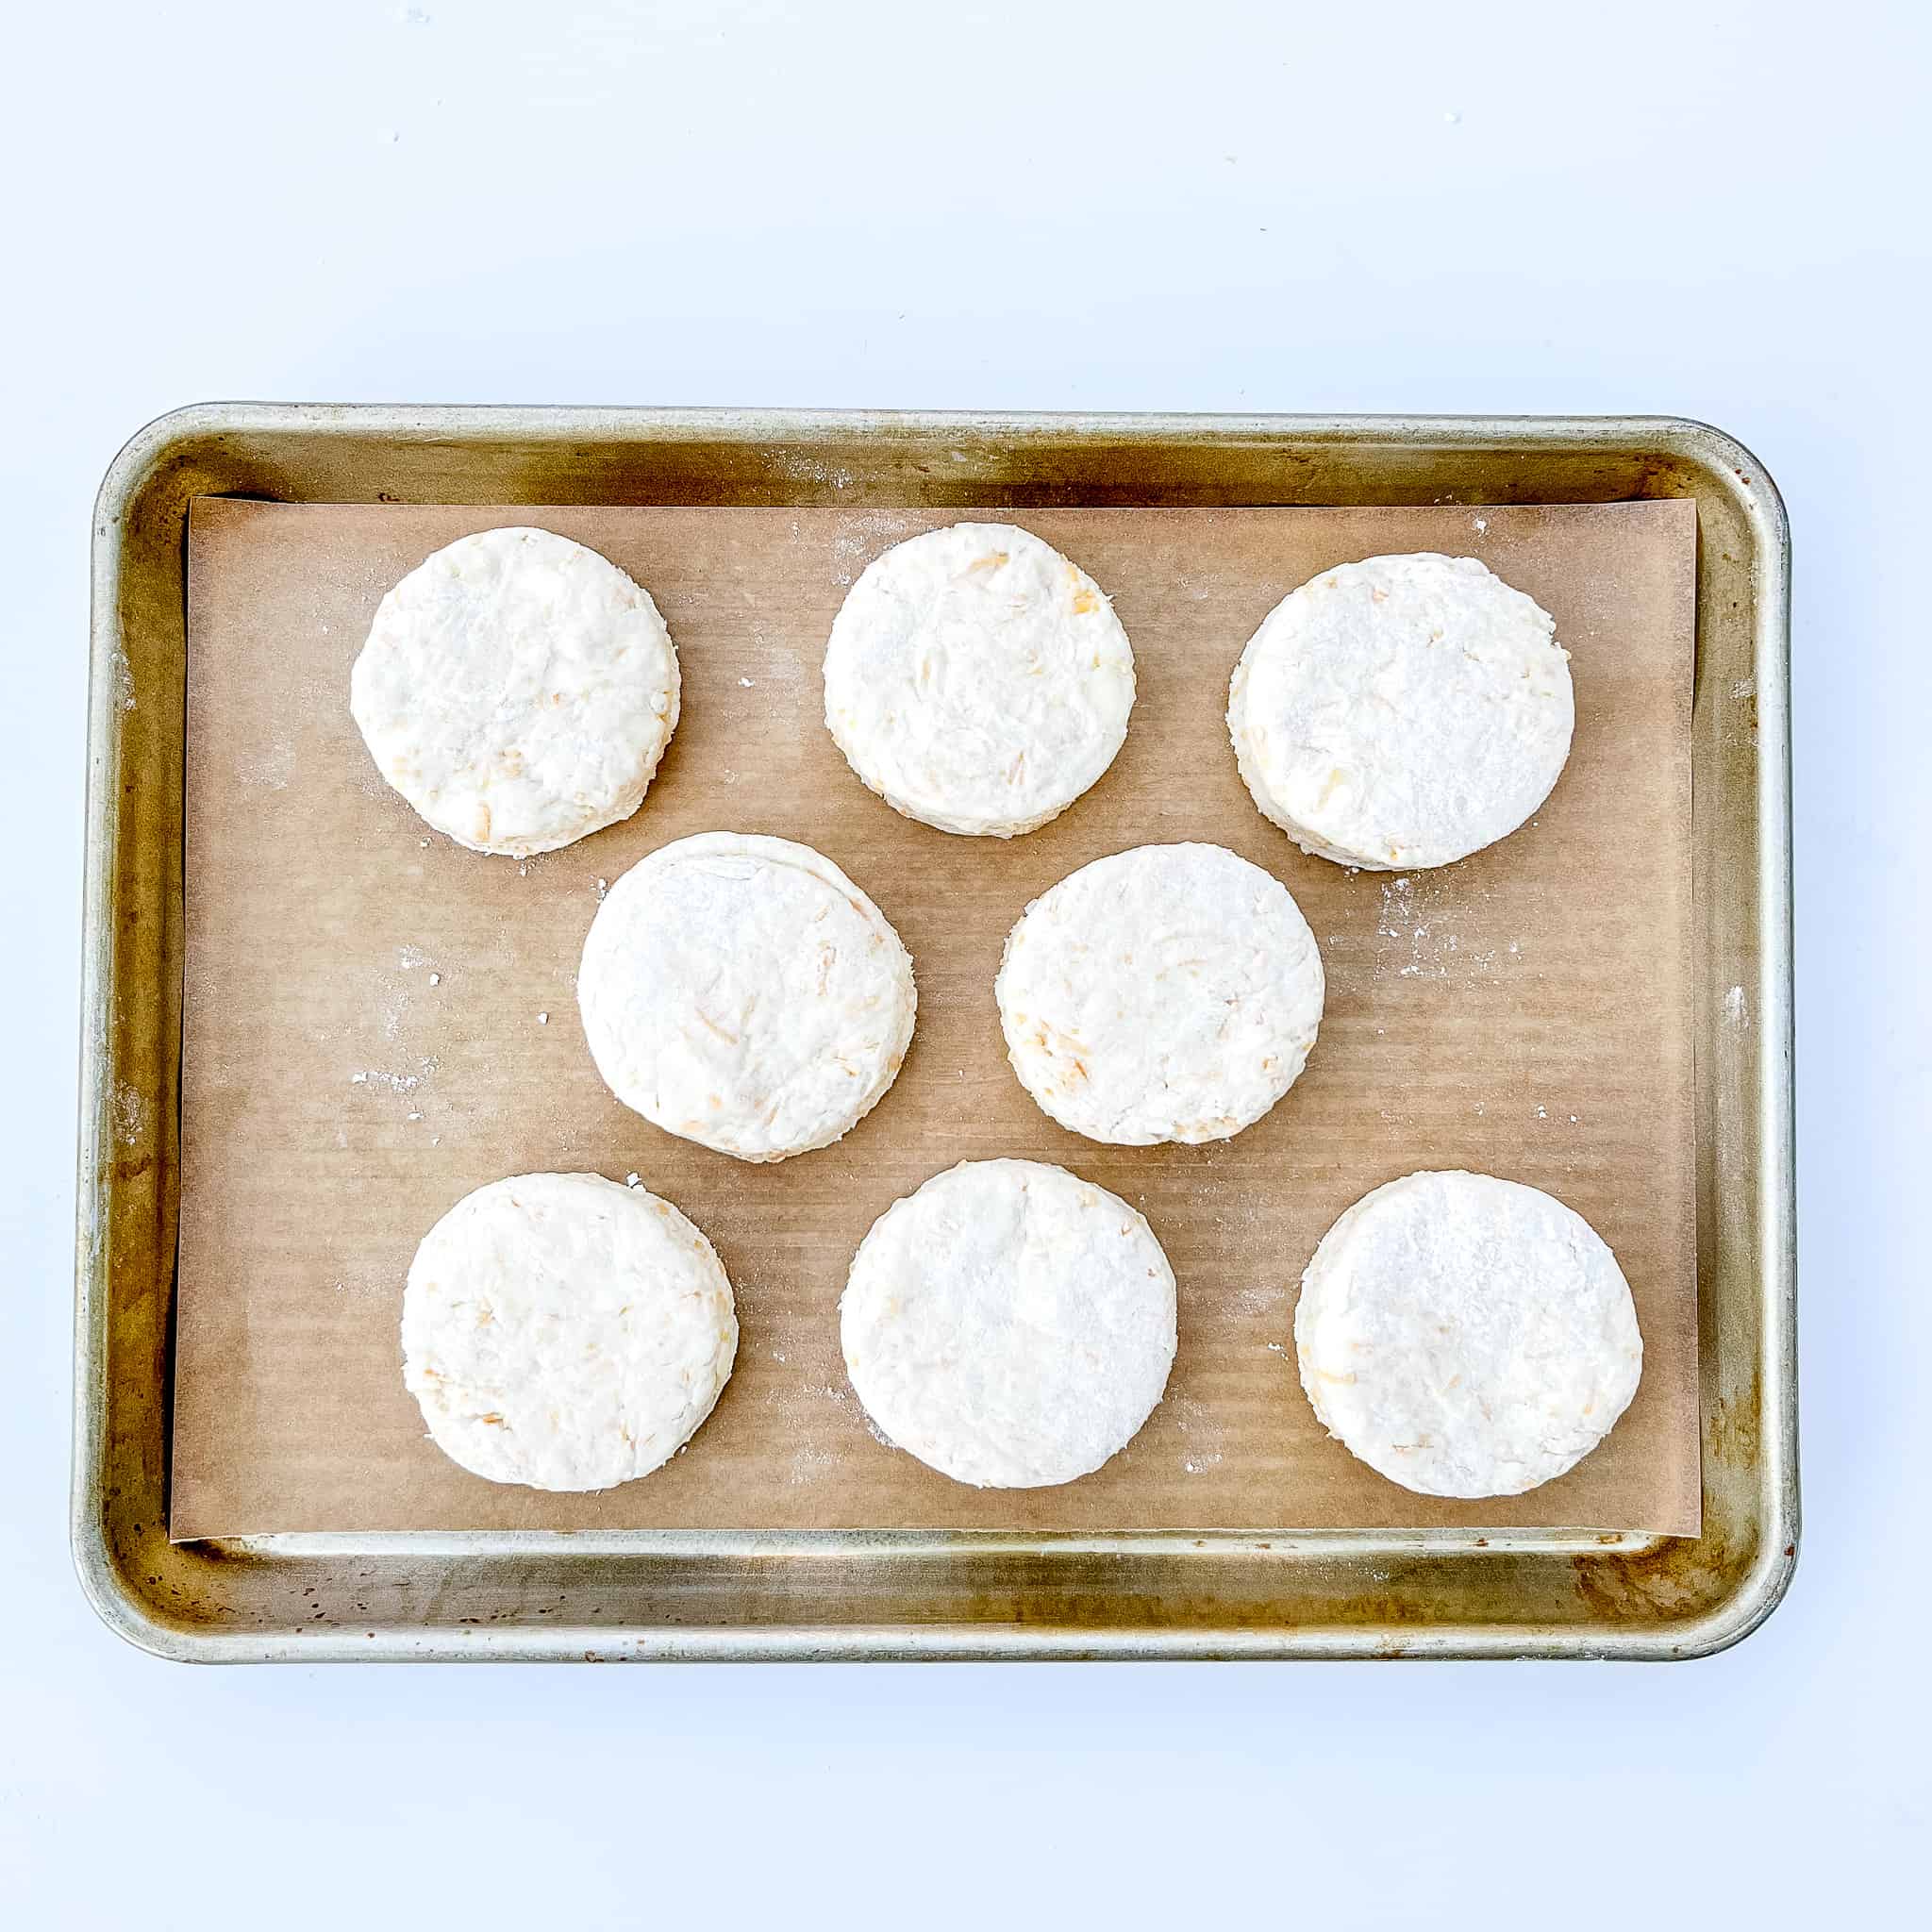 Biscuits on a sheet tray.